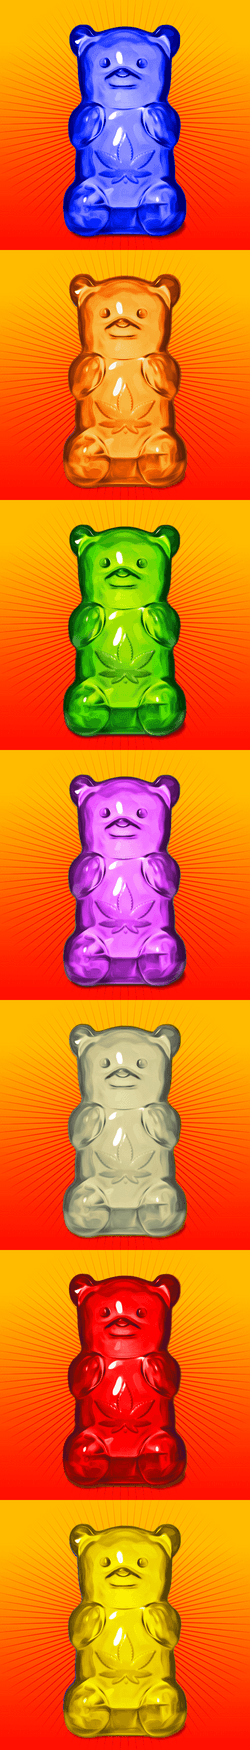 Yummy Gummy Bears collection image